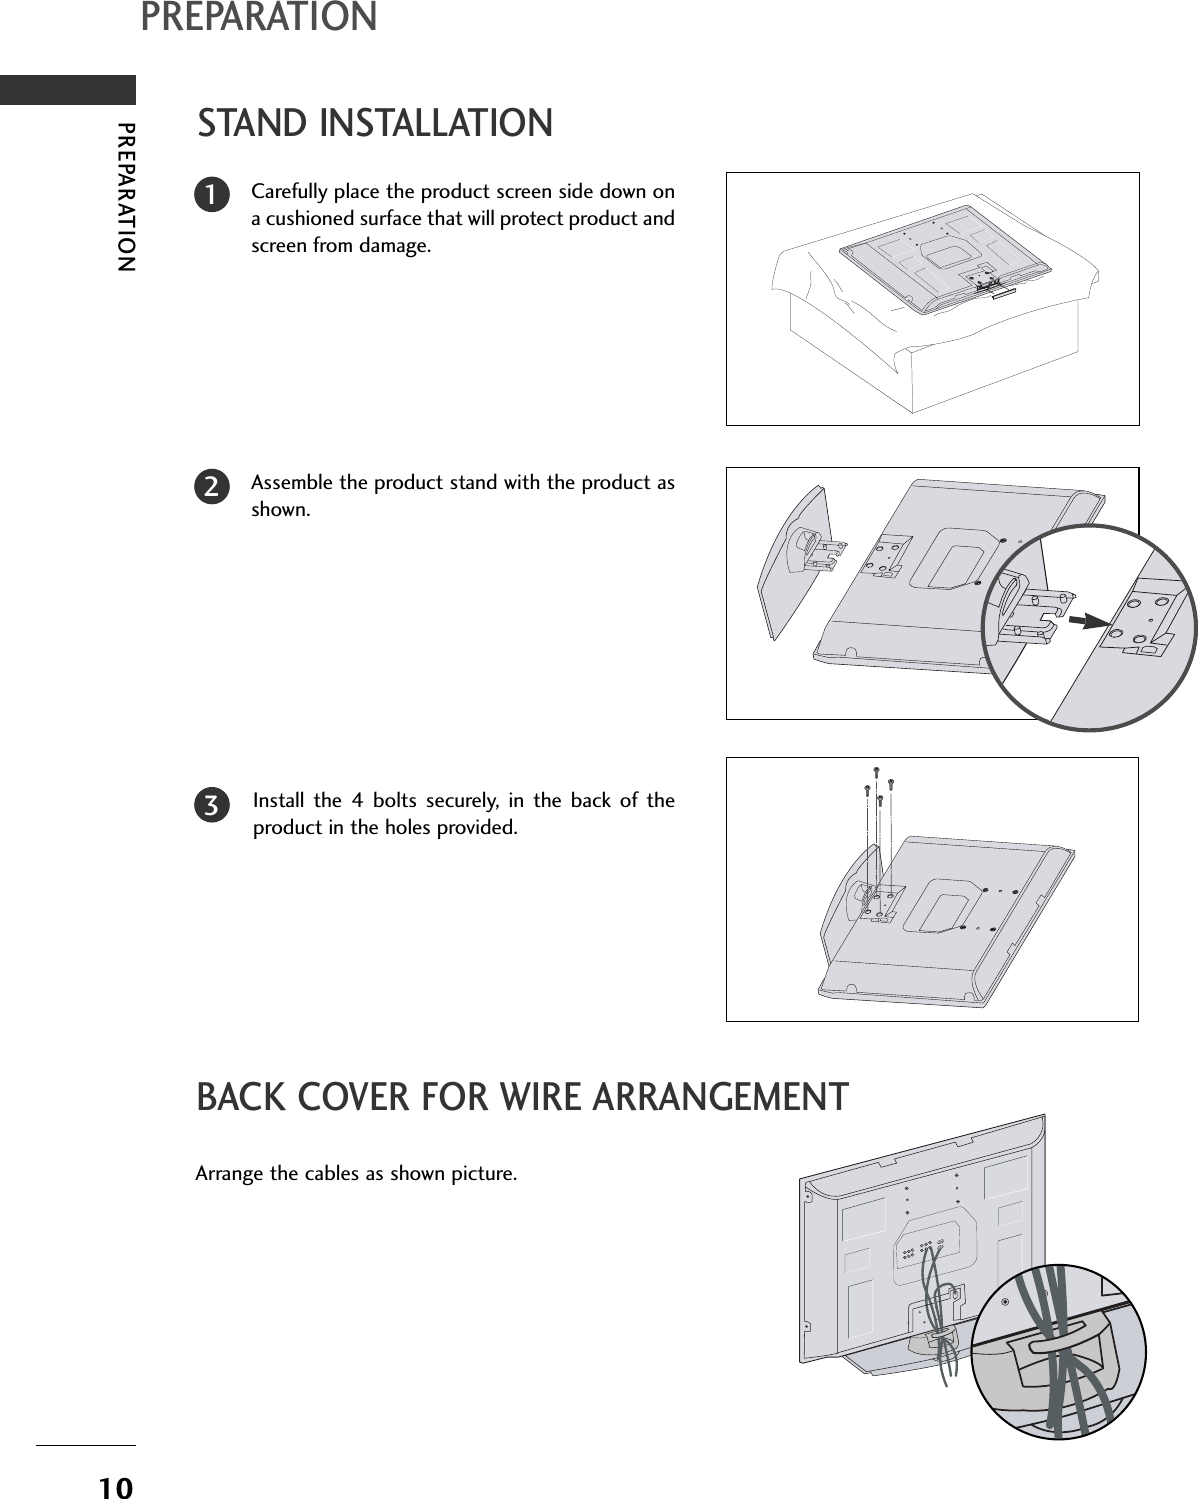 10PREPARATIONPREPARATIONSTAND INSTALLATIONCarefully place the product screen side down ona cushioned surface that will protect product andscreen from damage.Assemble the product stand with the product asshown. Install the 4 bolts securely, in the back of theproduct in the holes provided.123BACK COVER FOR WIRE ARRANGEMENTArrange the cables as shown picture.